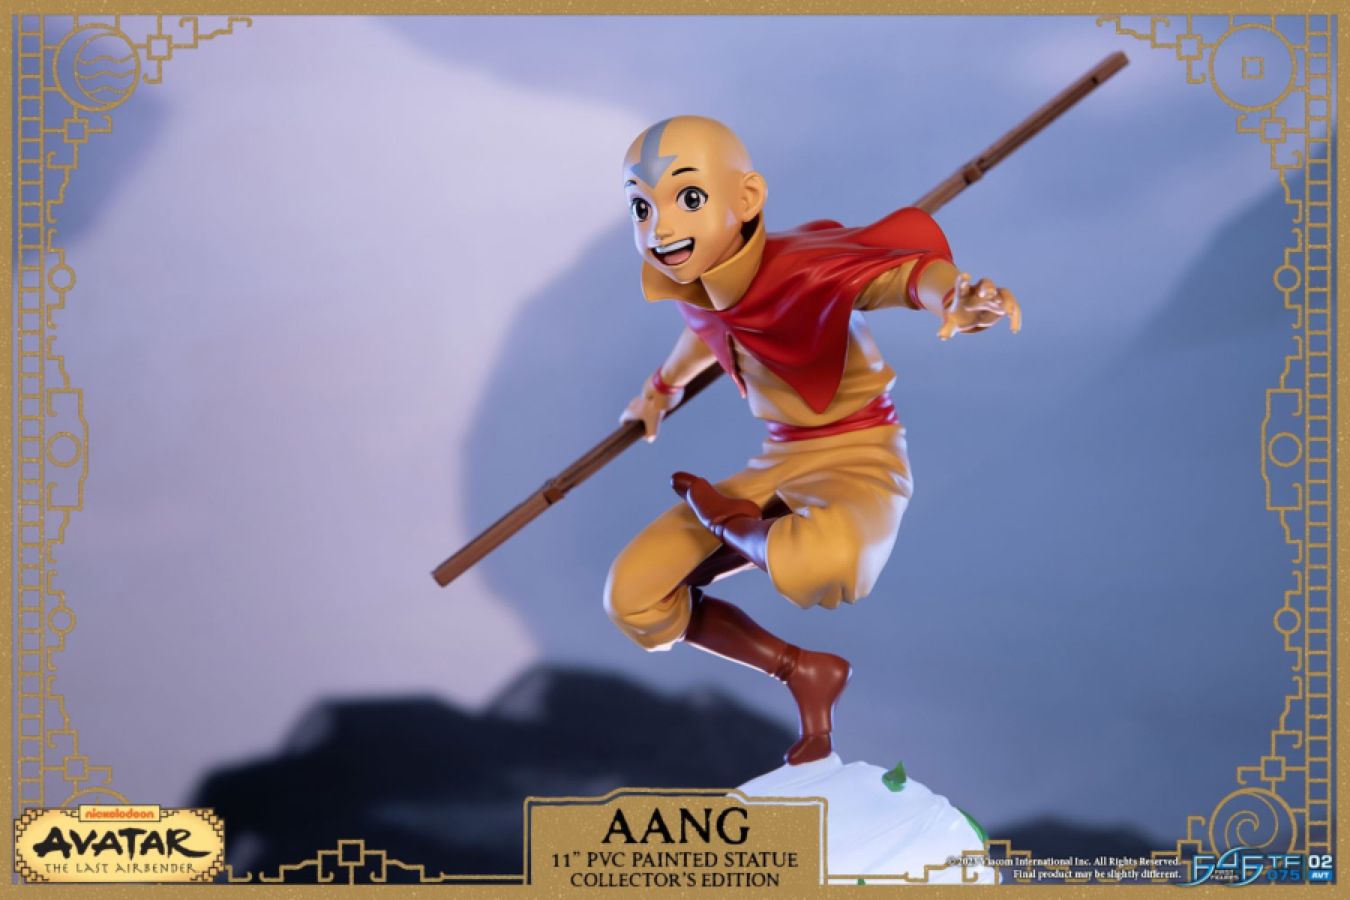 Avatar the Last Airbender - Aang PVC Statue Collectors (Light Up) Edition